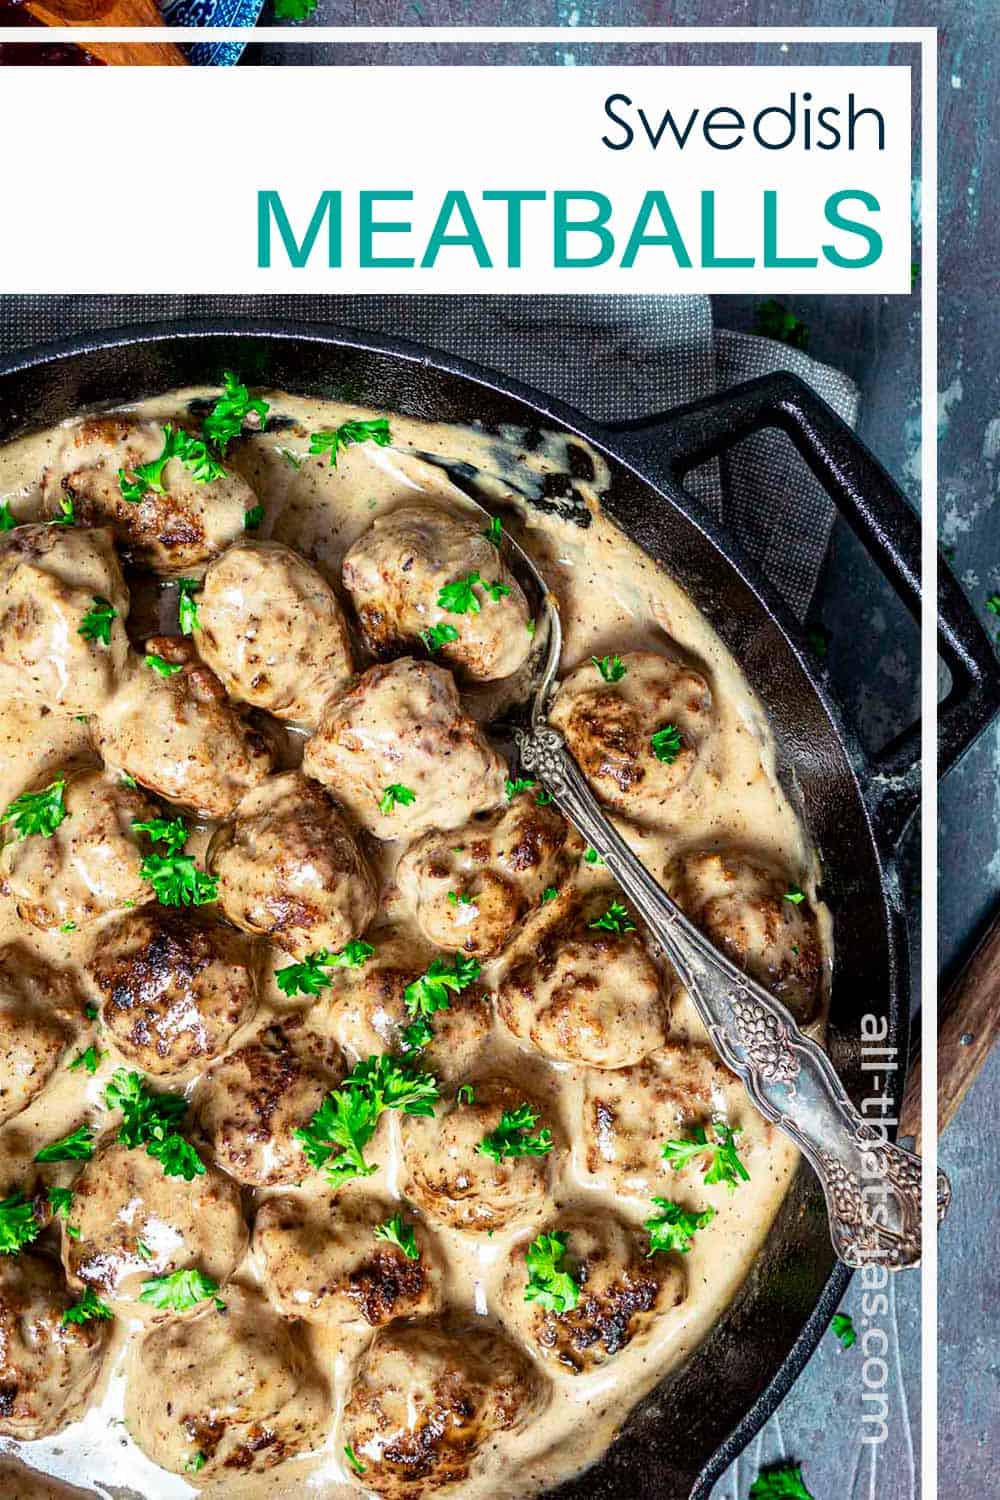 A close up photo of meatballs in gravy with text overlay.